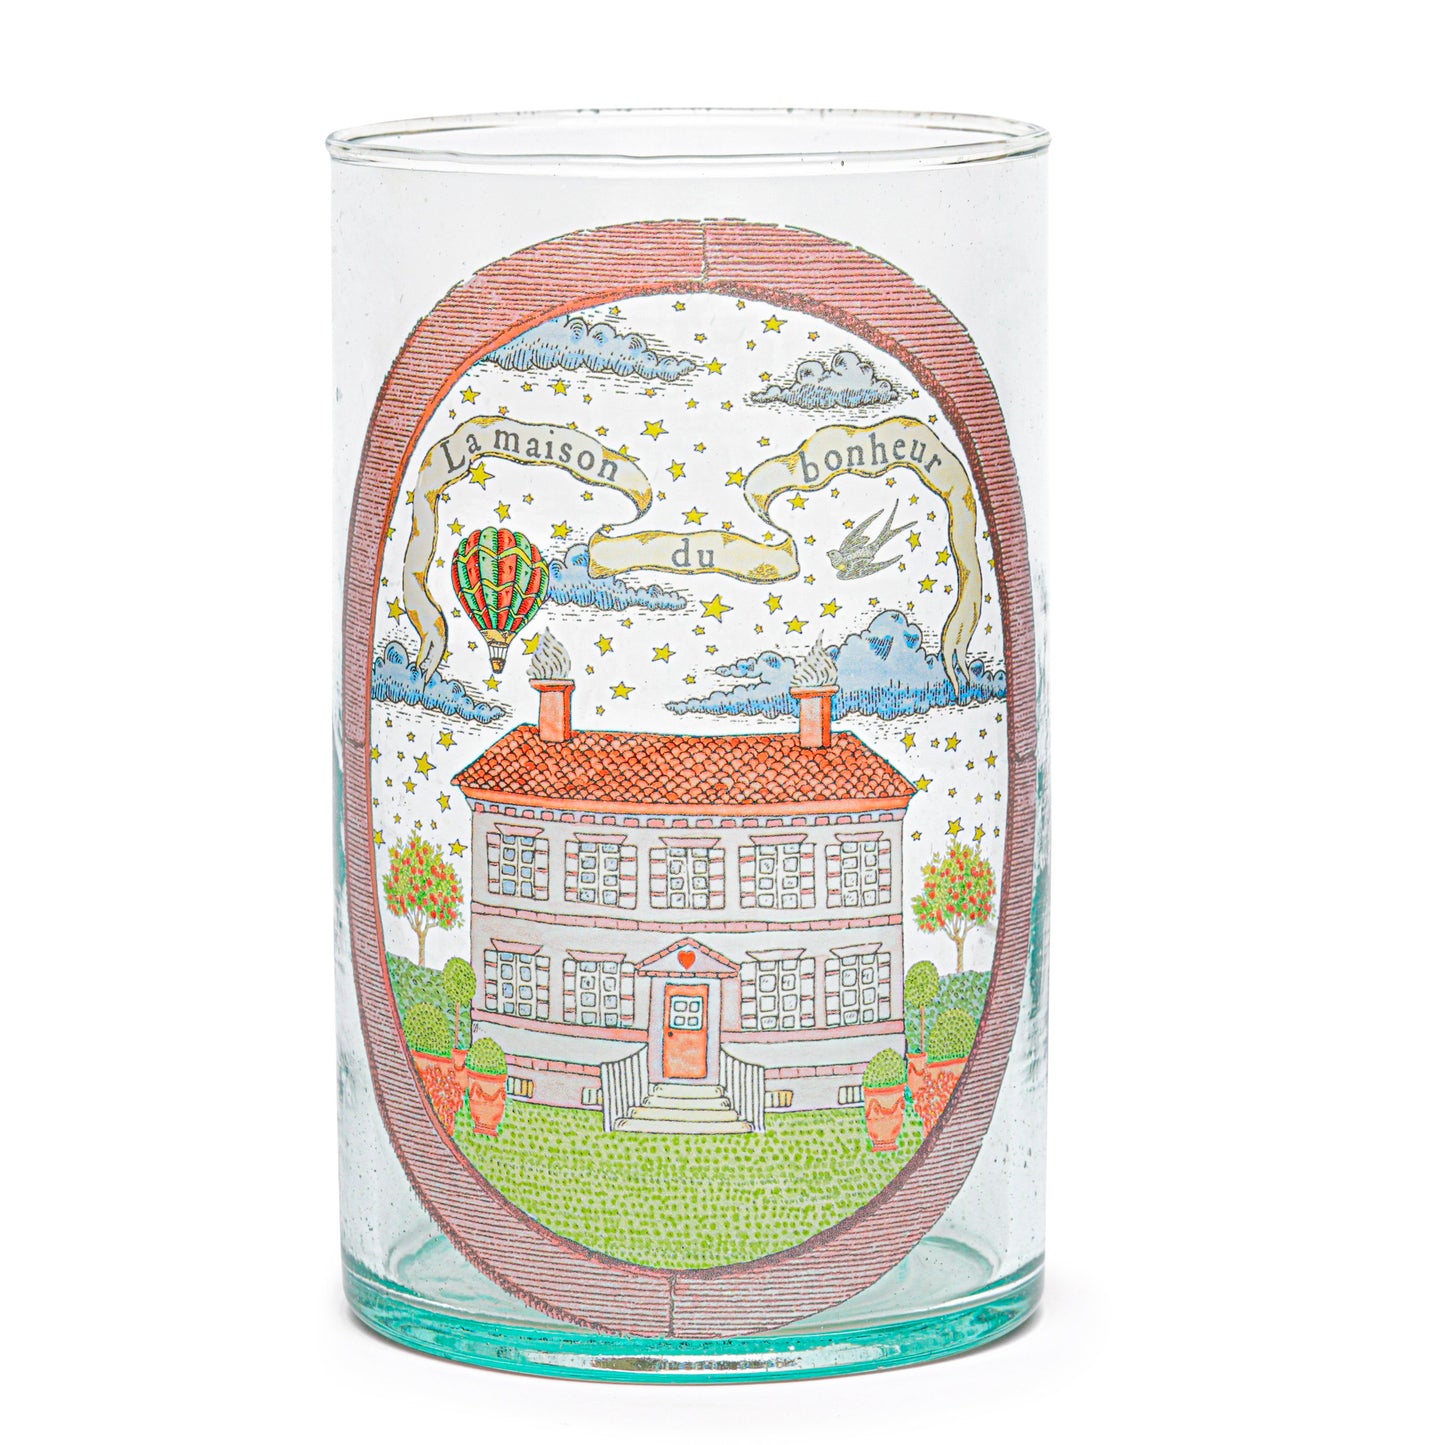 Illustrated vase | THE HOUSE OF HAPPINESS